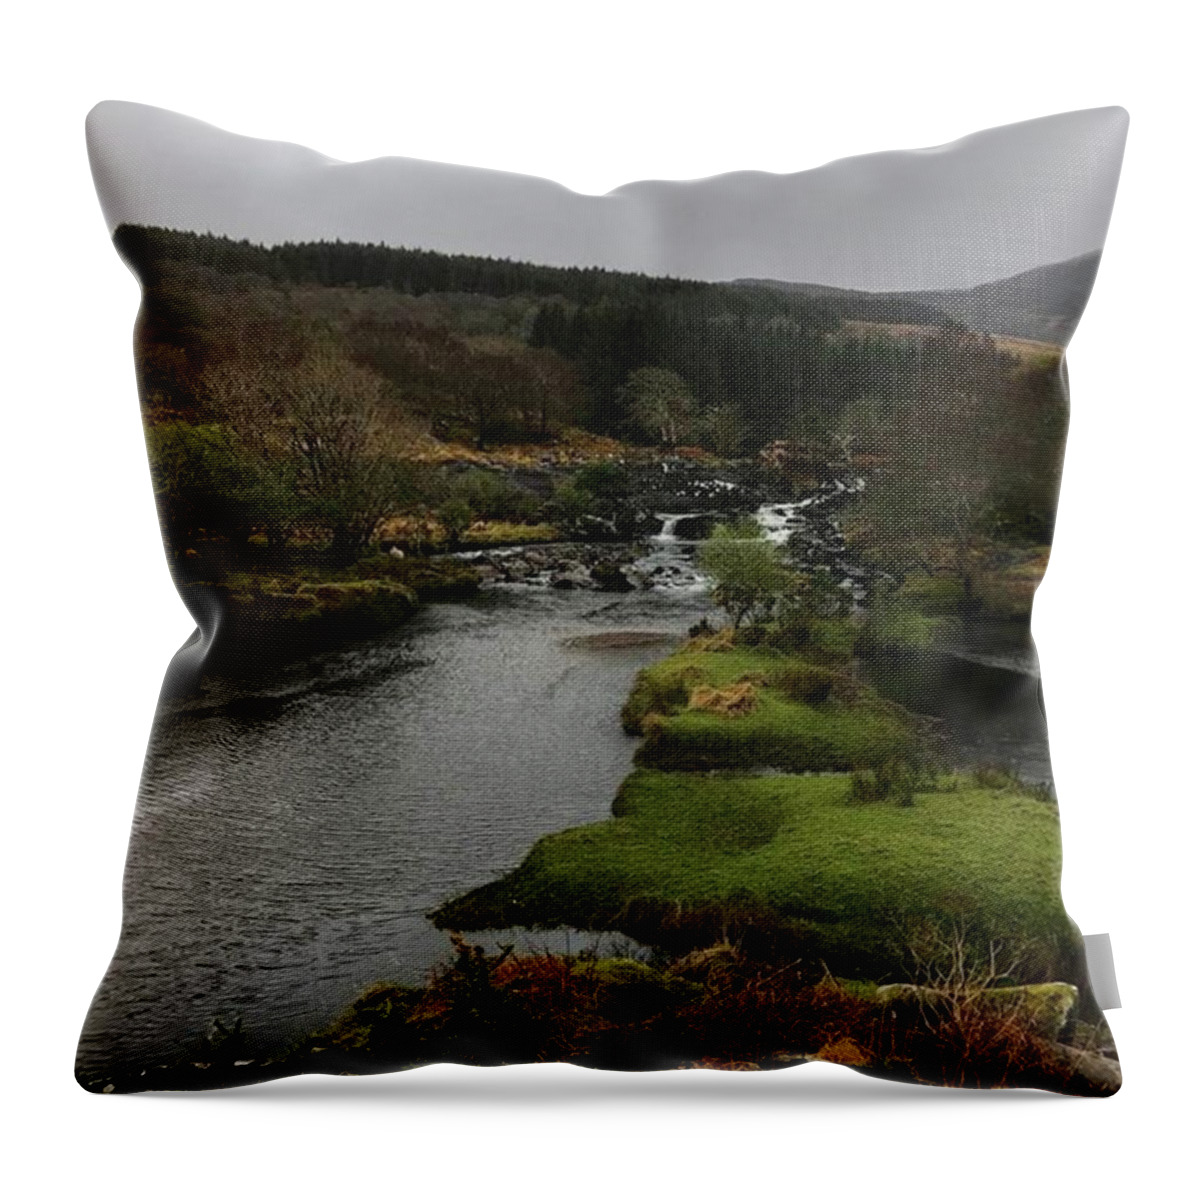 Lake Throw Pillow featuring the photograph The Black Valley In County Kerry by Katie Cupcakes